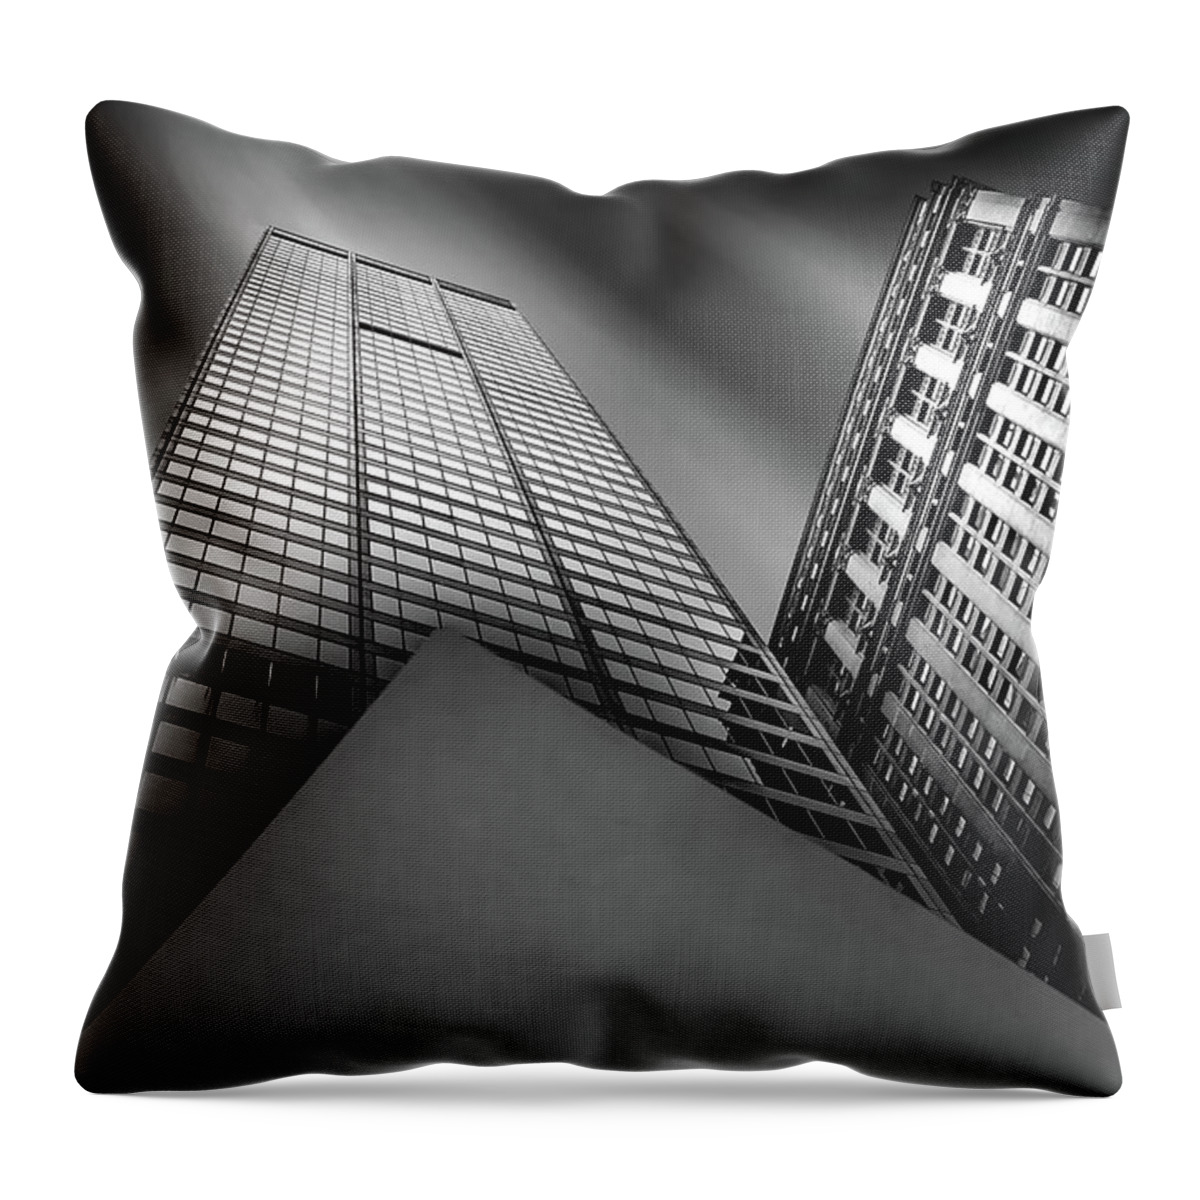 Architectural Throw Pillow featuring the photograph Corporate Shadows by Az Jackson